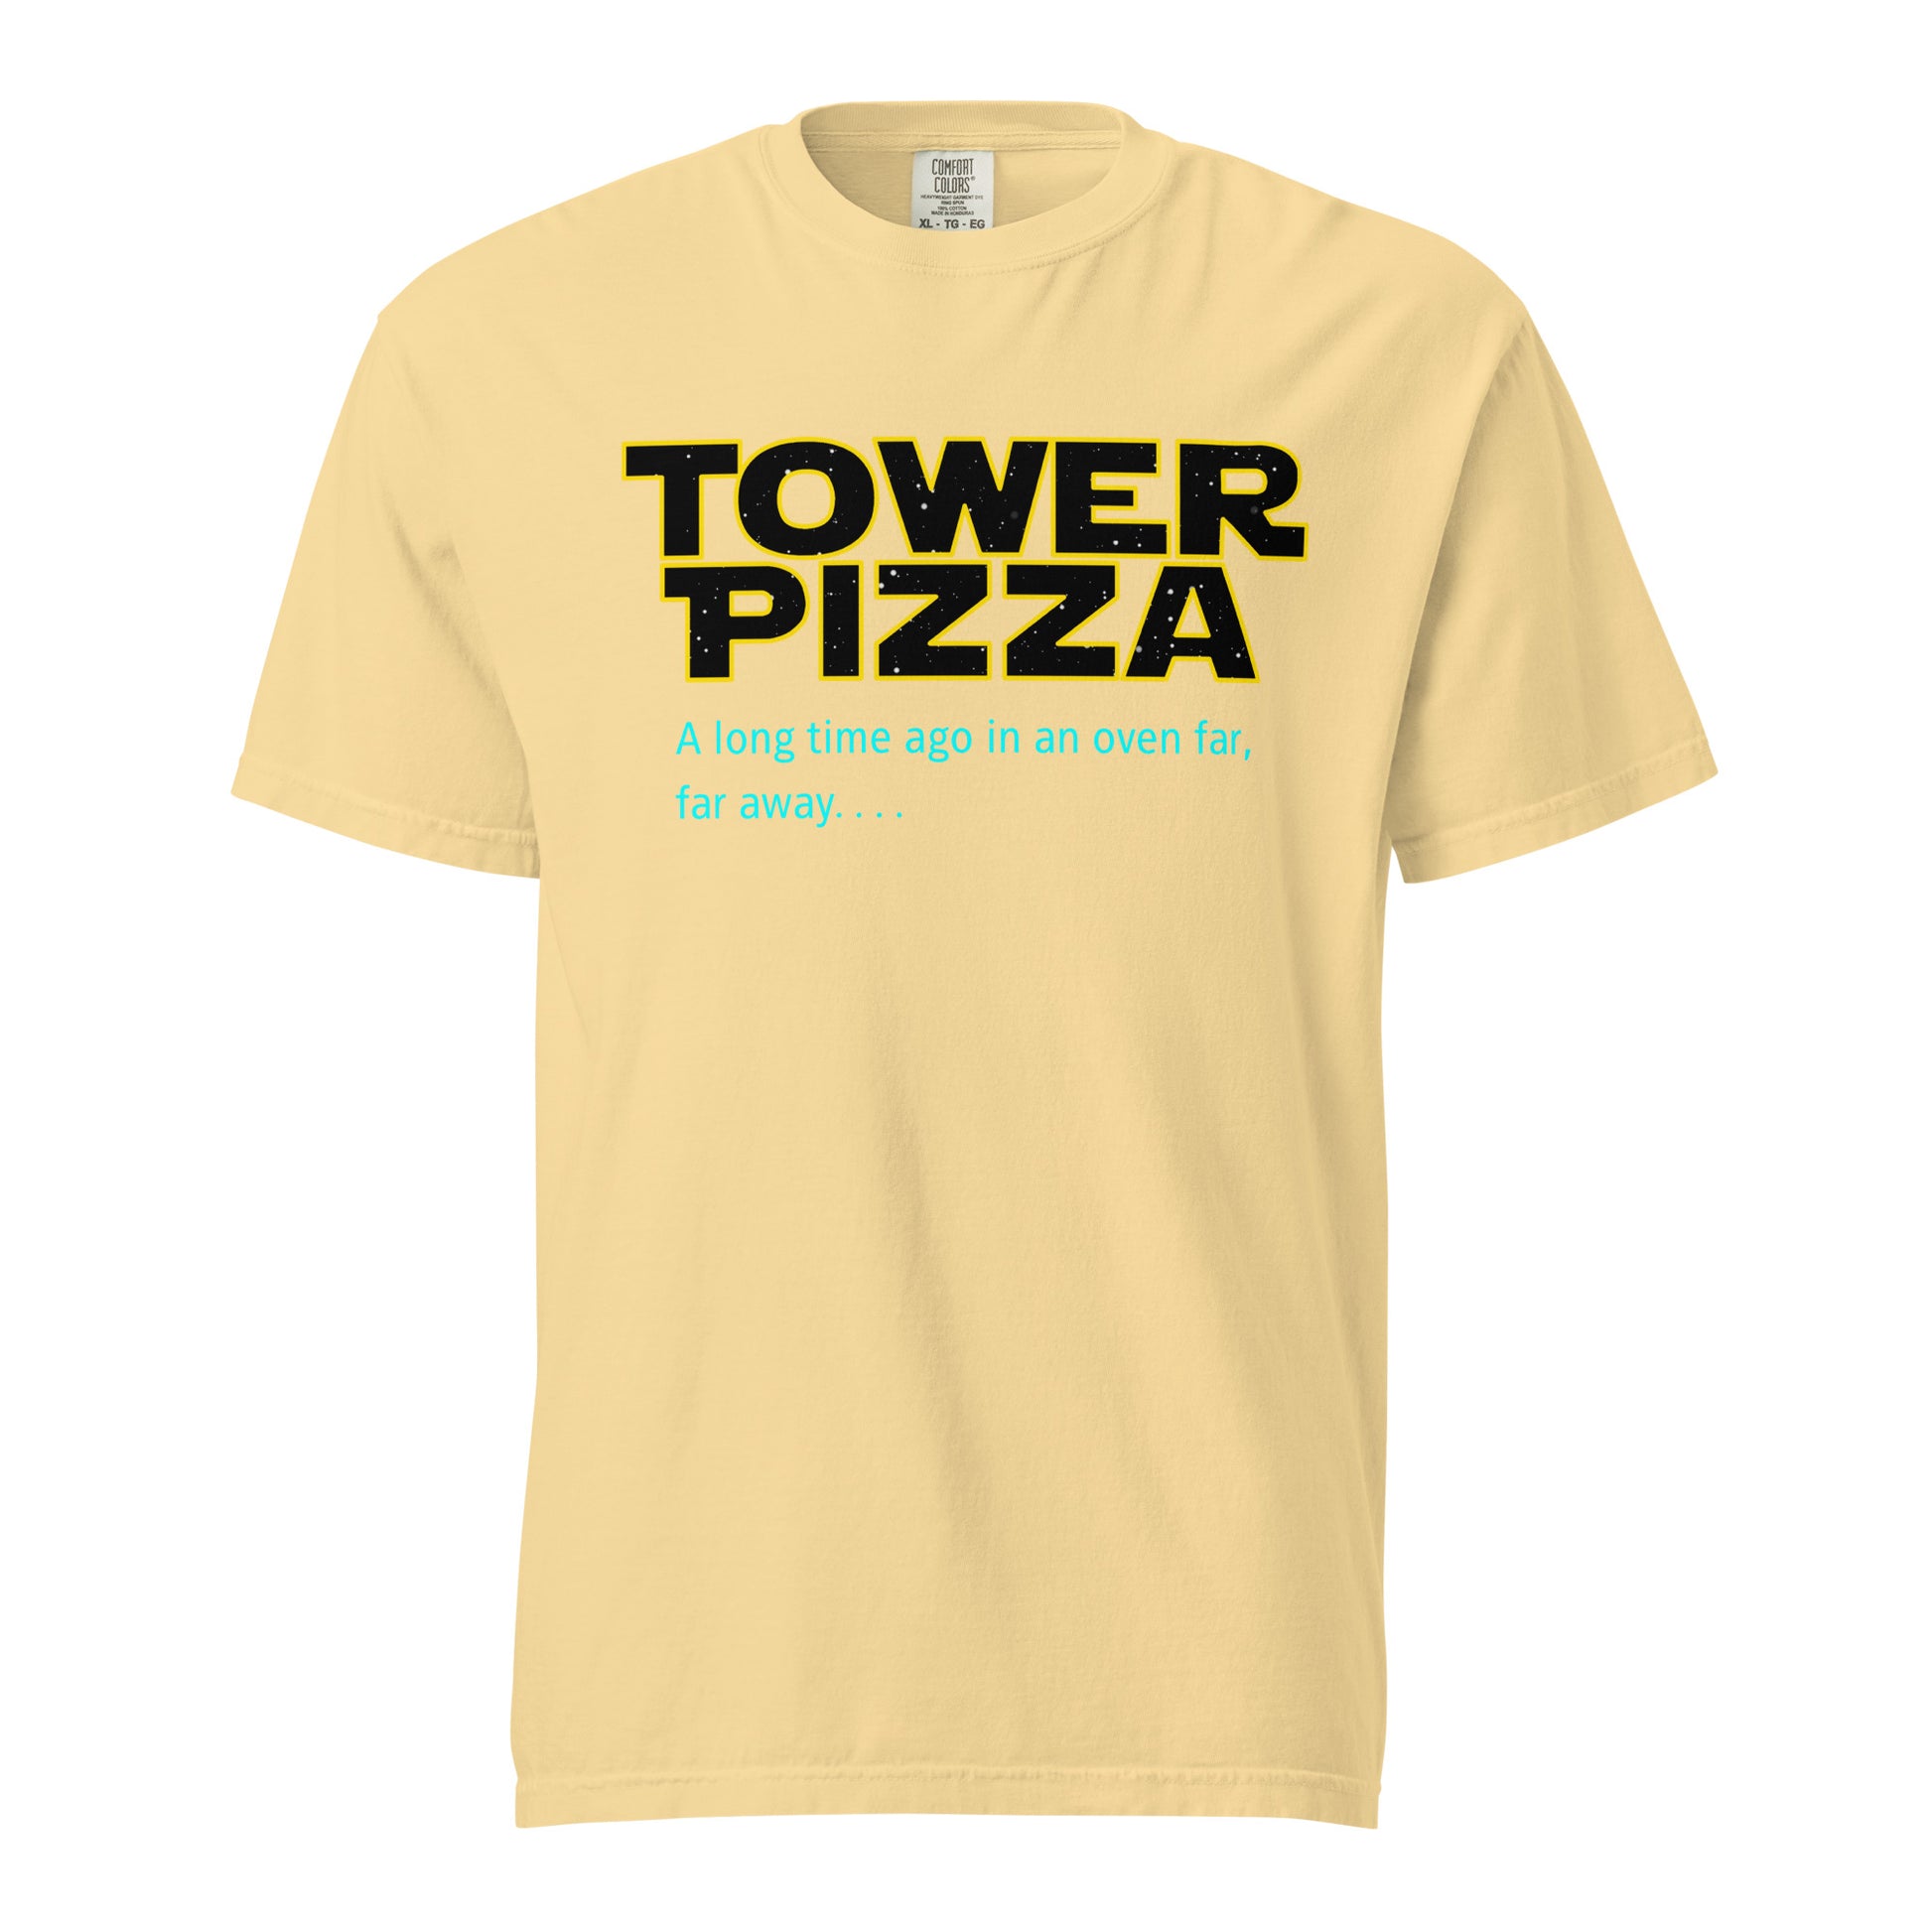 Tower Pizza "A long time ago.." t-shirt - Tower Pizza Gift Shop